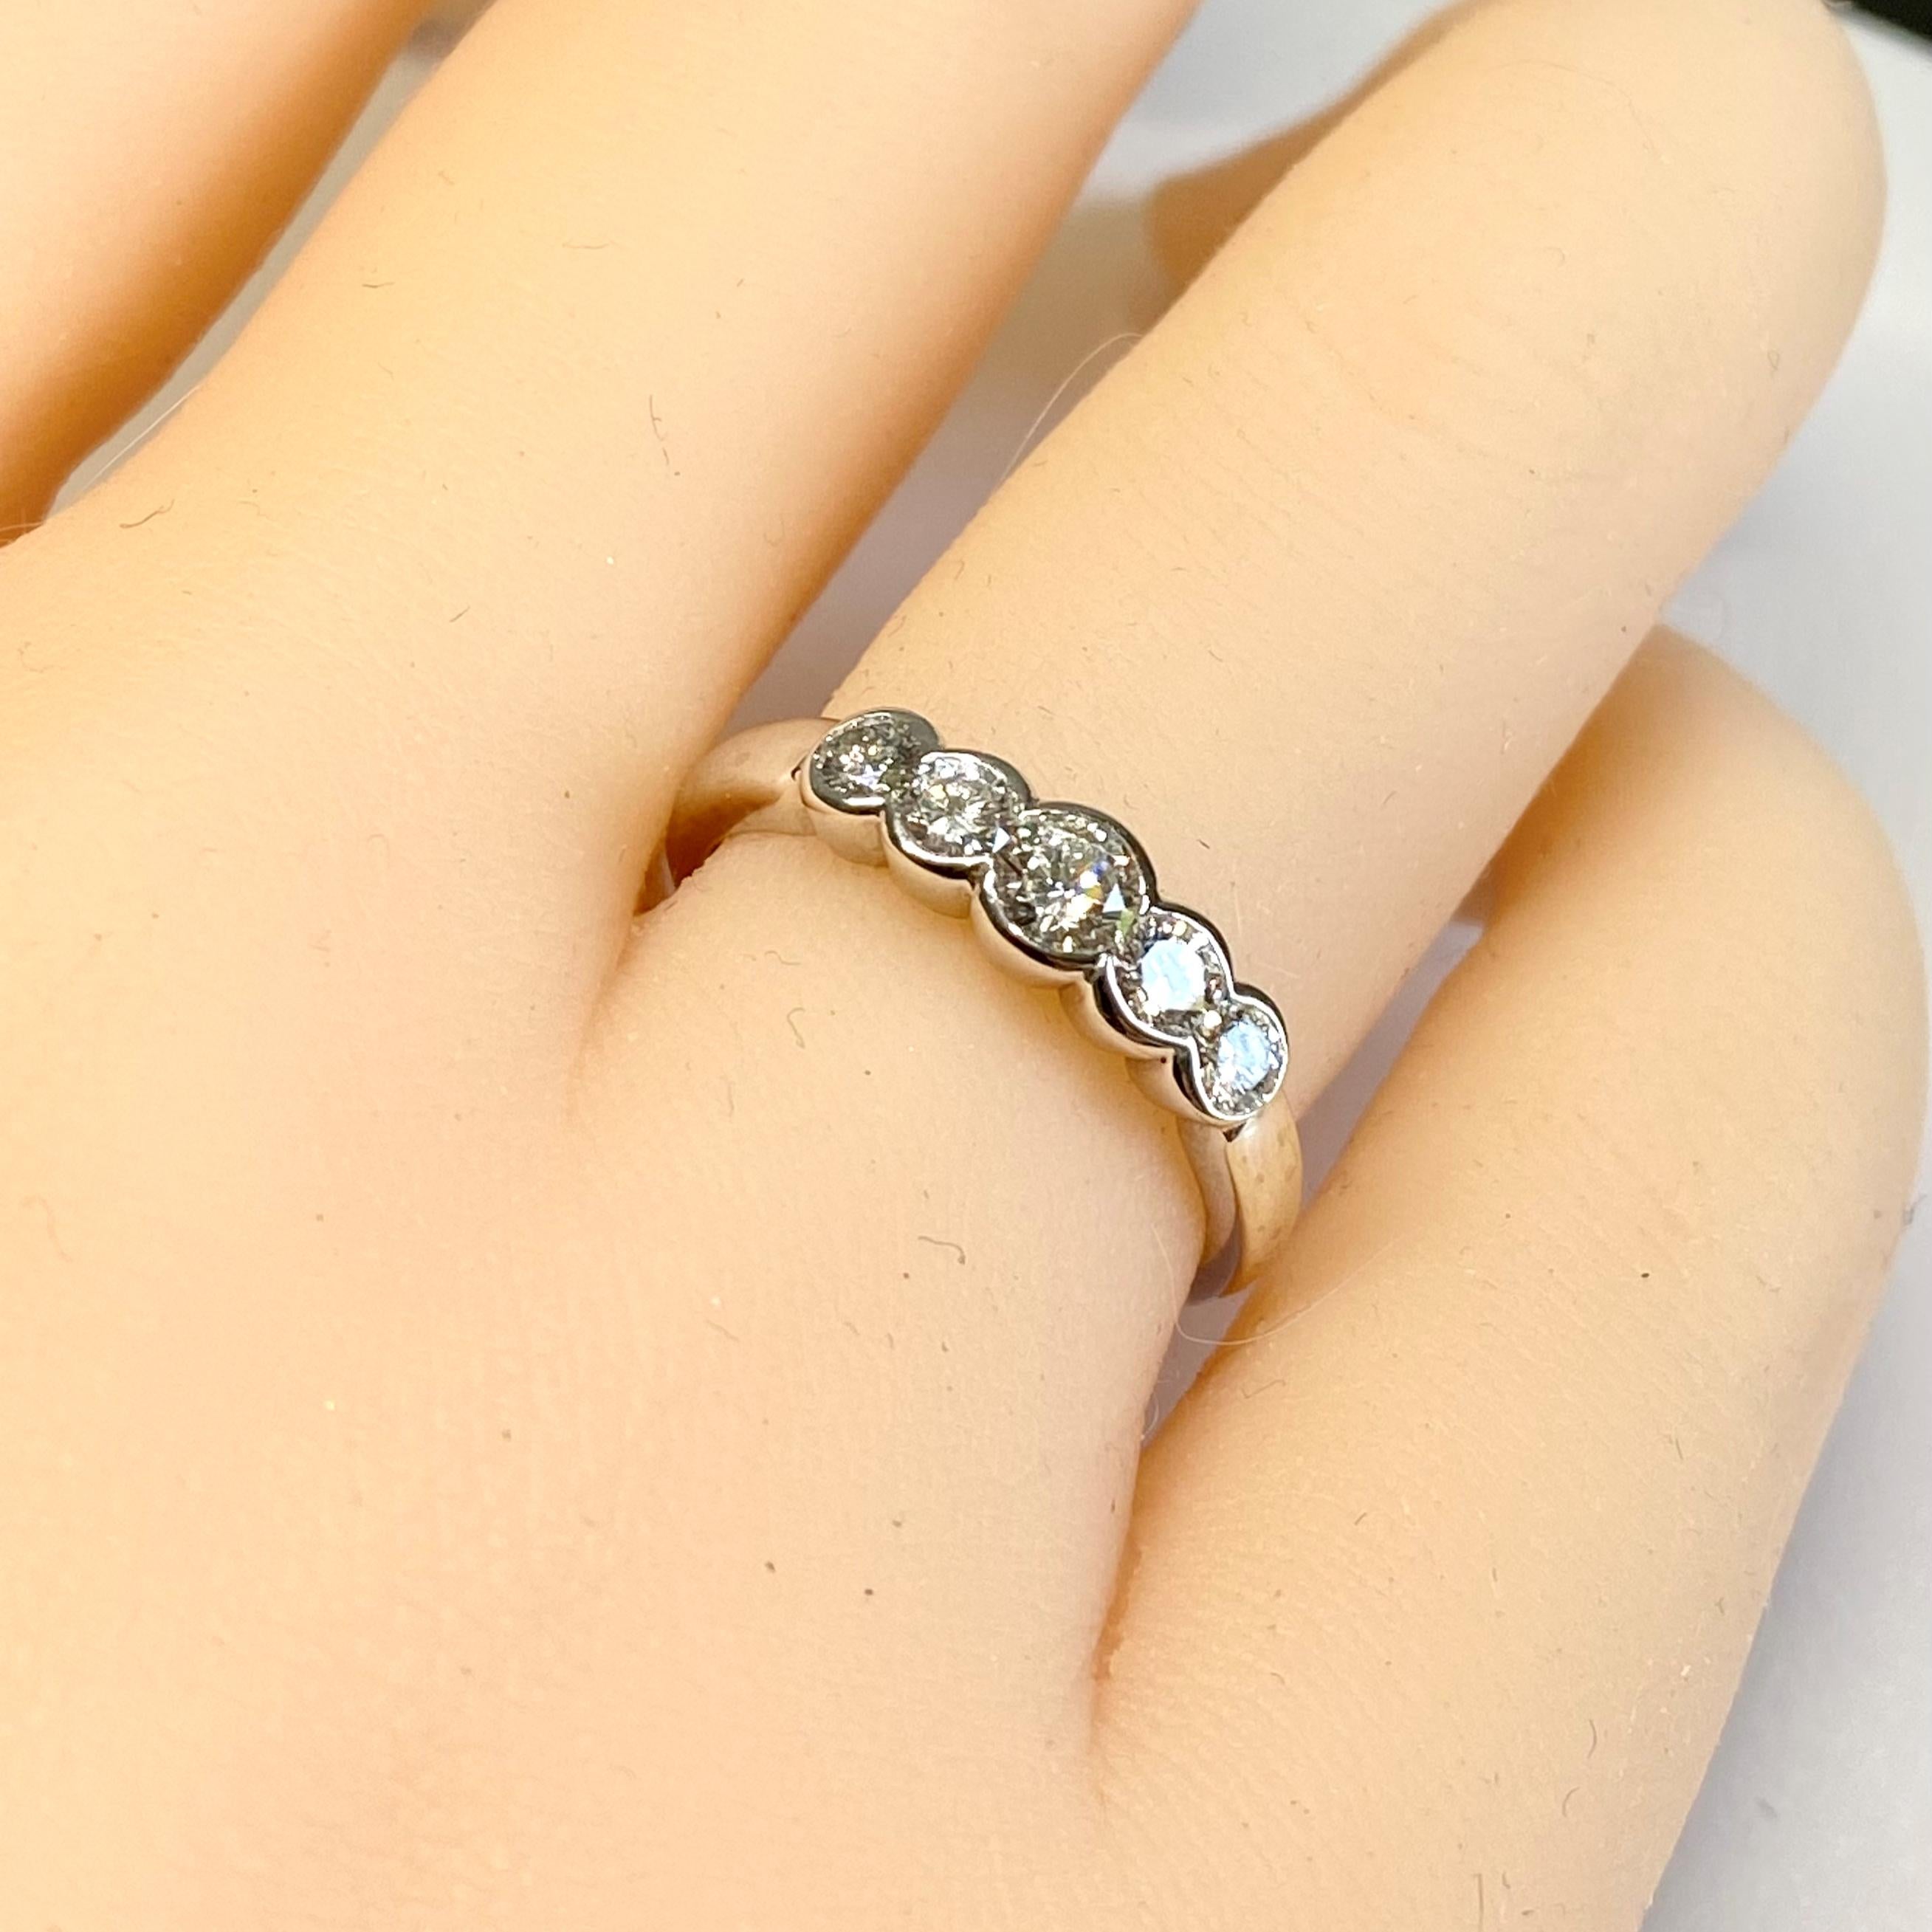 Platinum Vintage Five Graduated Diamond Scalloped Edge 0.30 Carat Ring Size 6 In Good Condition For Sale In New York, NY